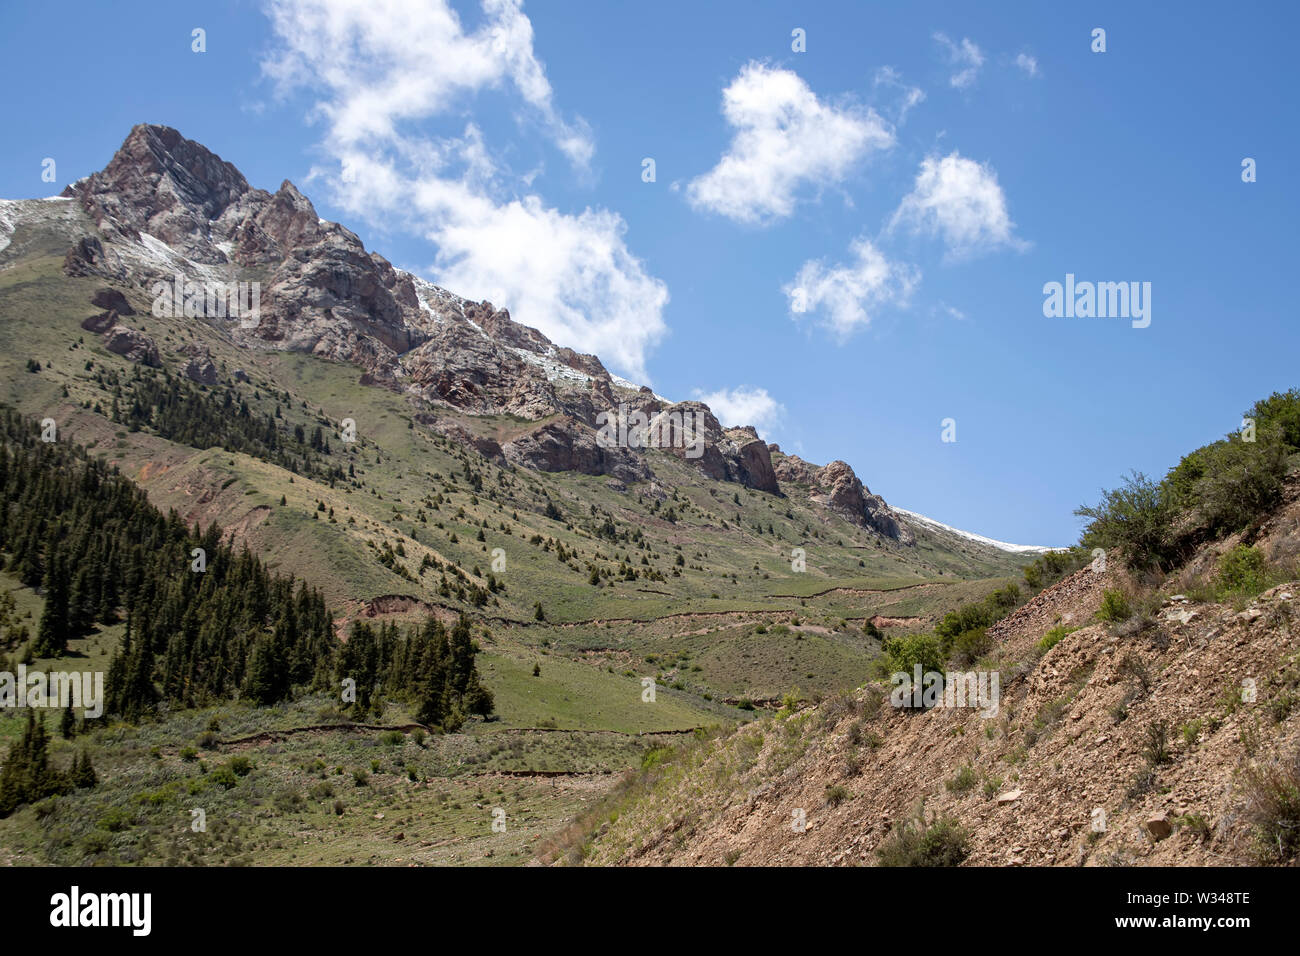 Mountain range overgrown with spruce forest. snowy peaks and green pastures. Kyrgyzstan Travel. Stock Photo